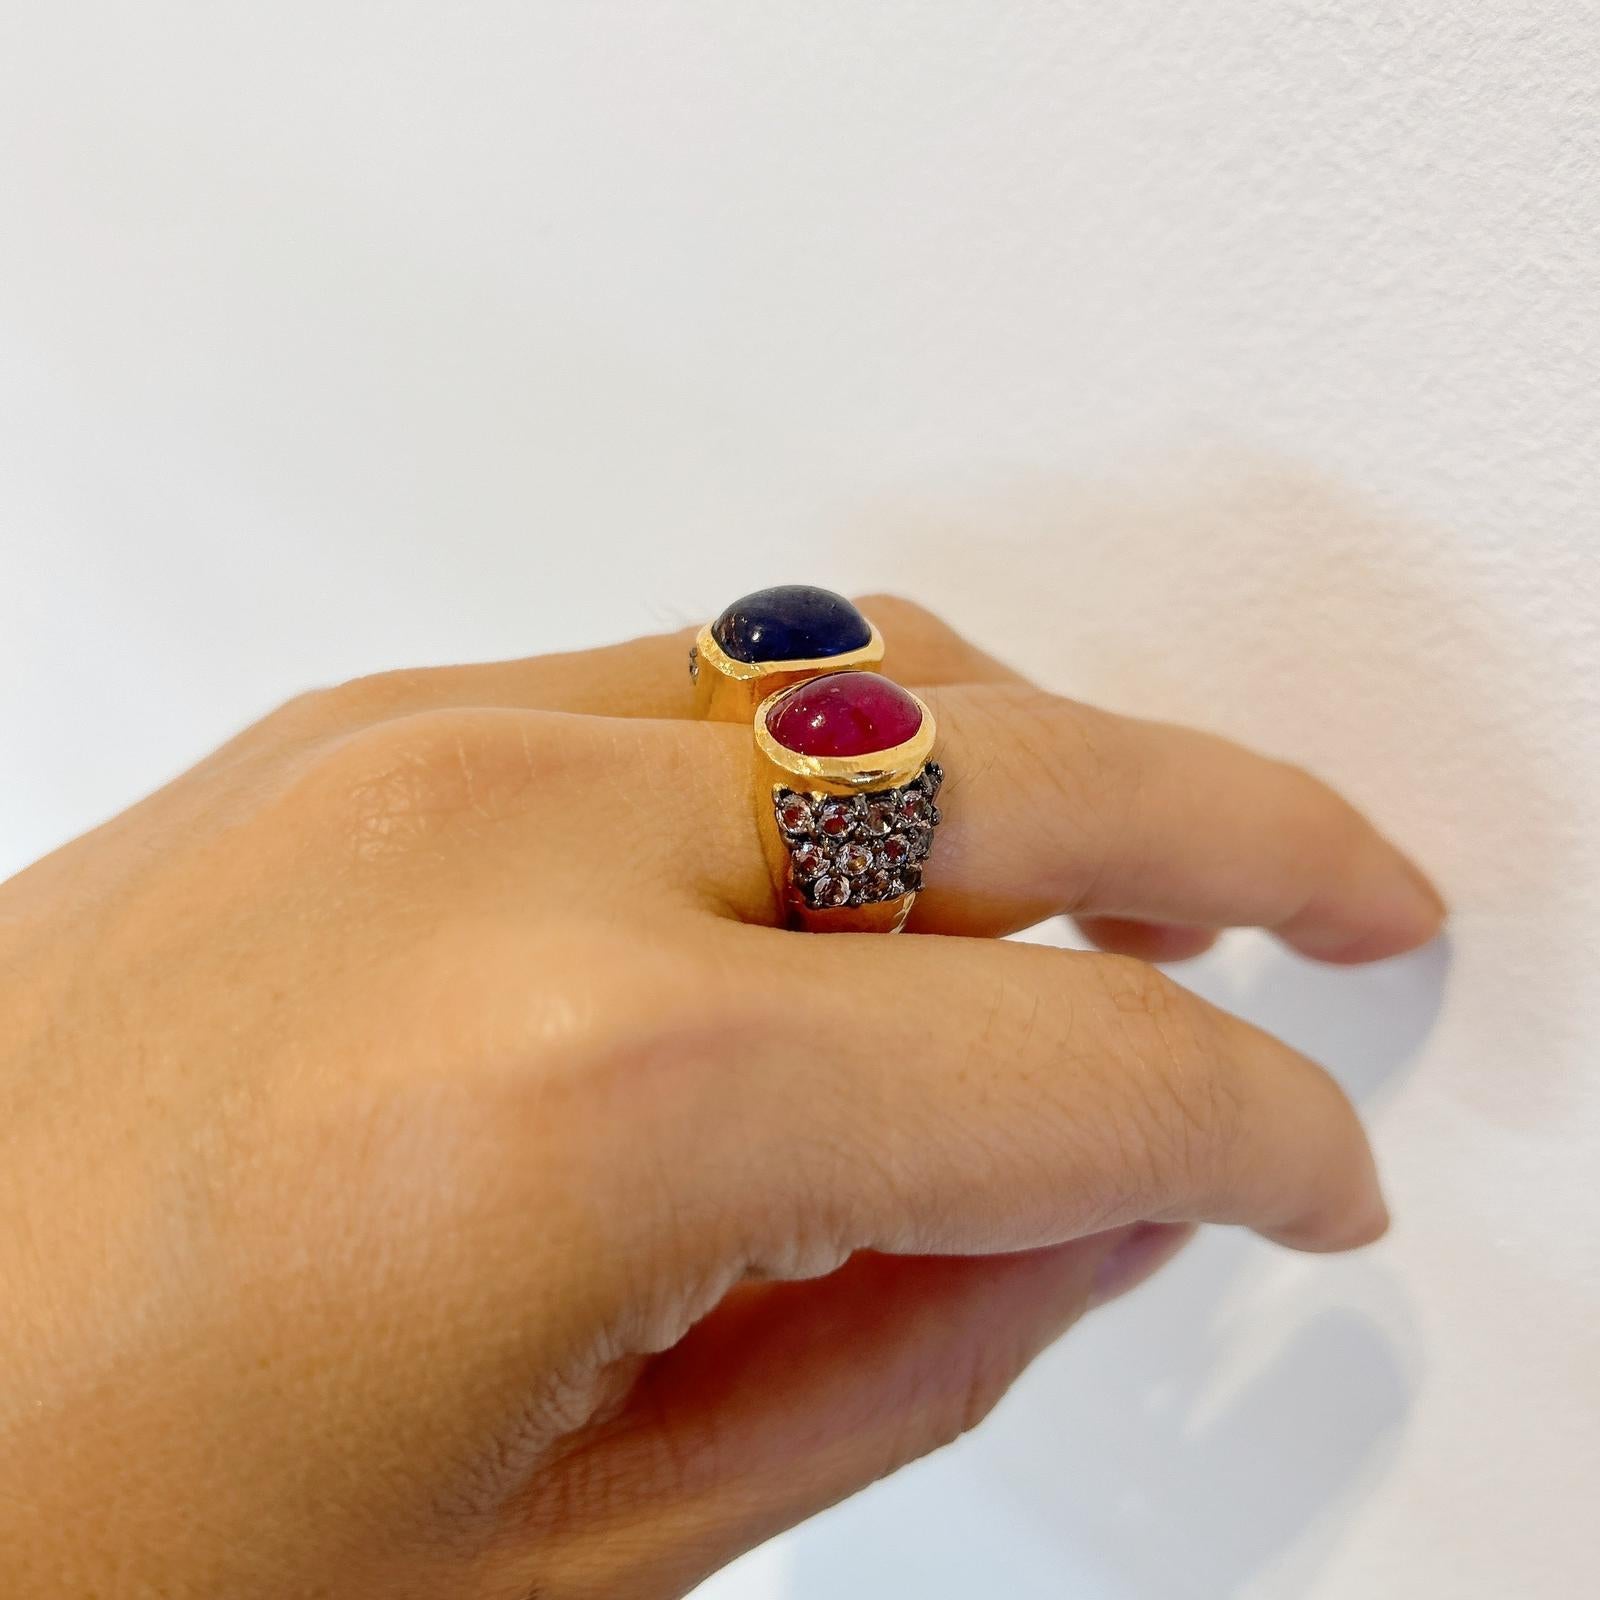 Cabochon Bochic “Capri” Blue Sapphire, Ruby & Topaz Cocktail Ring Set in 22k Gold & Silve For Sale